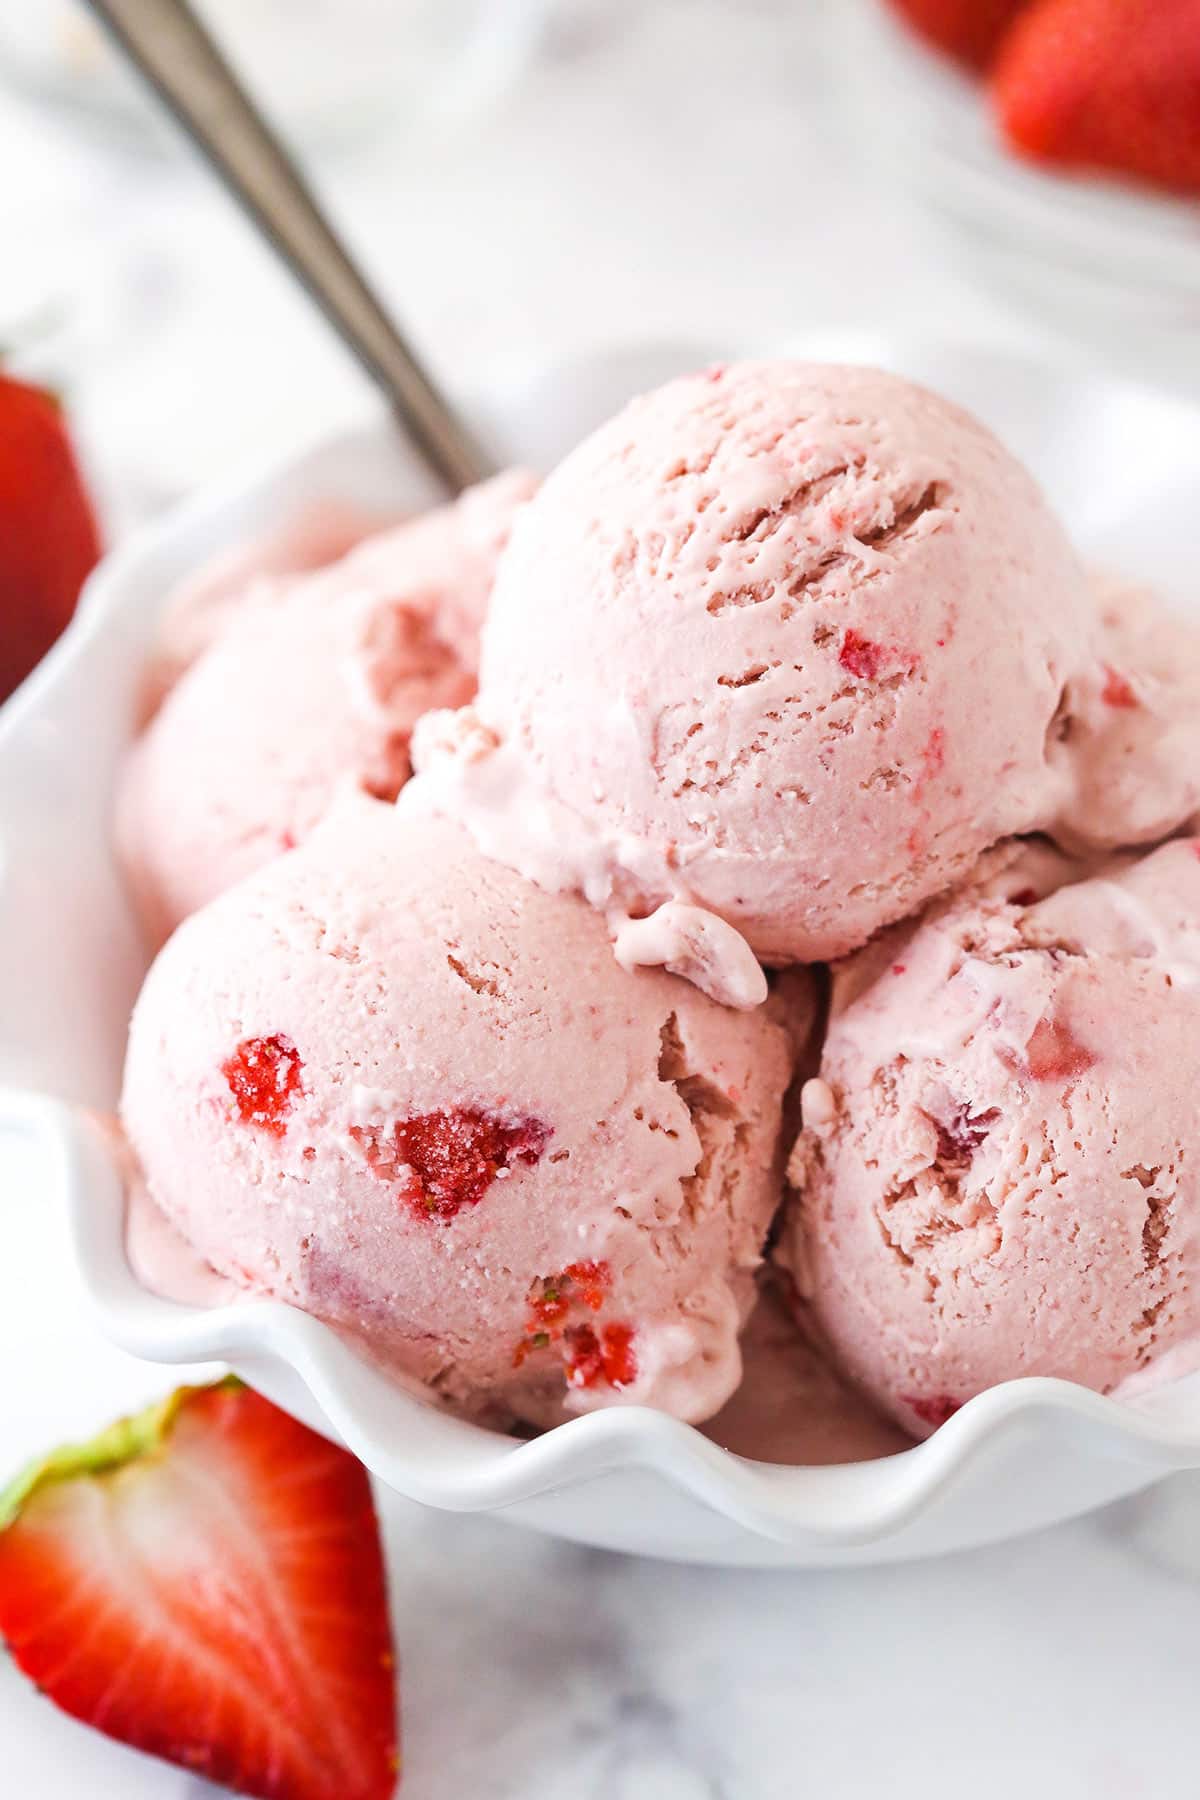 scoops of strawberry ice cream in white ruffled dish with a spoon